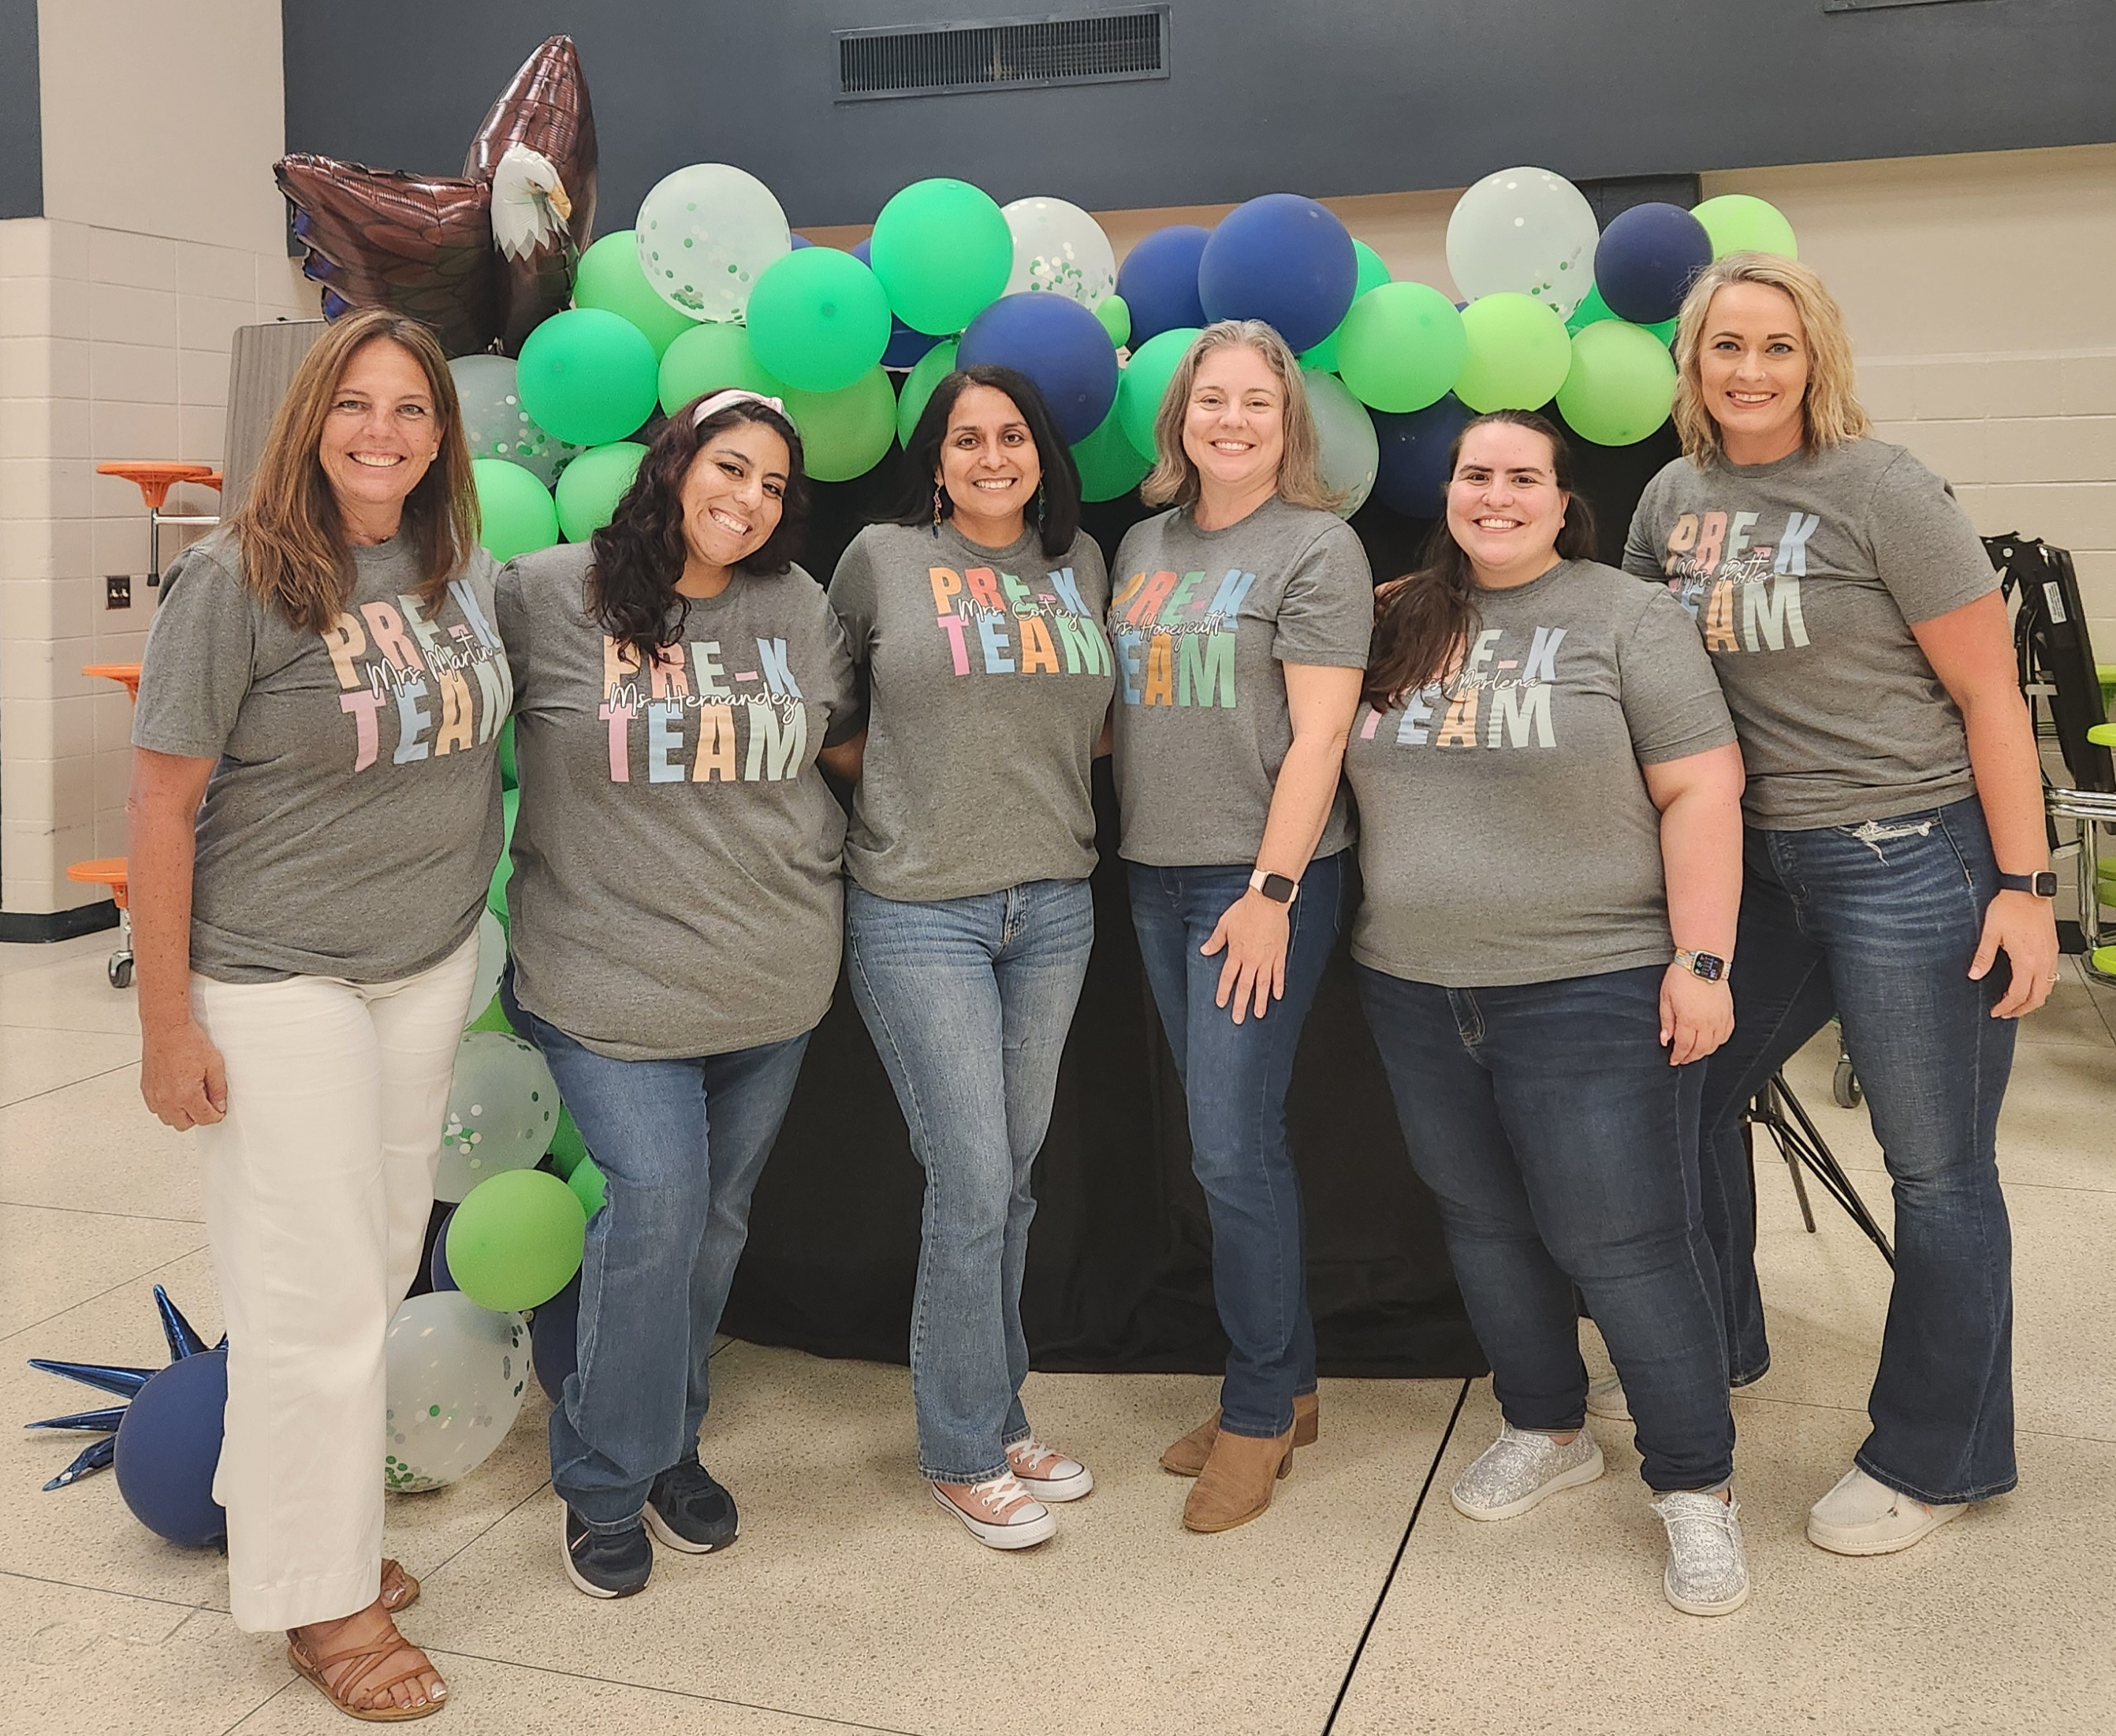 Pre-K teachers in white shirts standing posing in front of green balloons